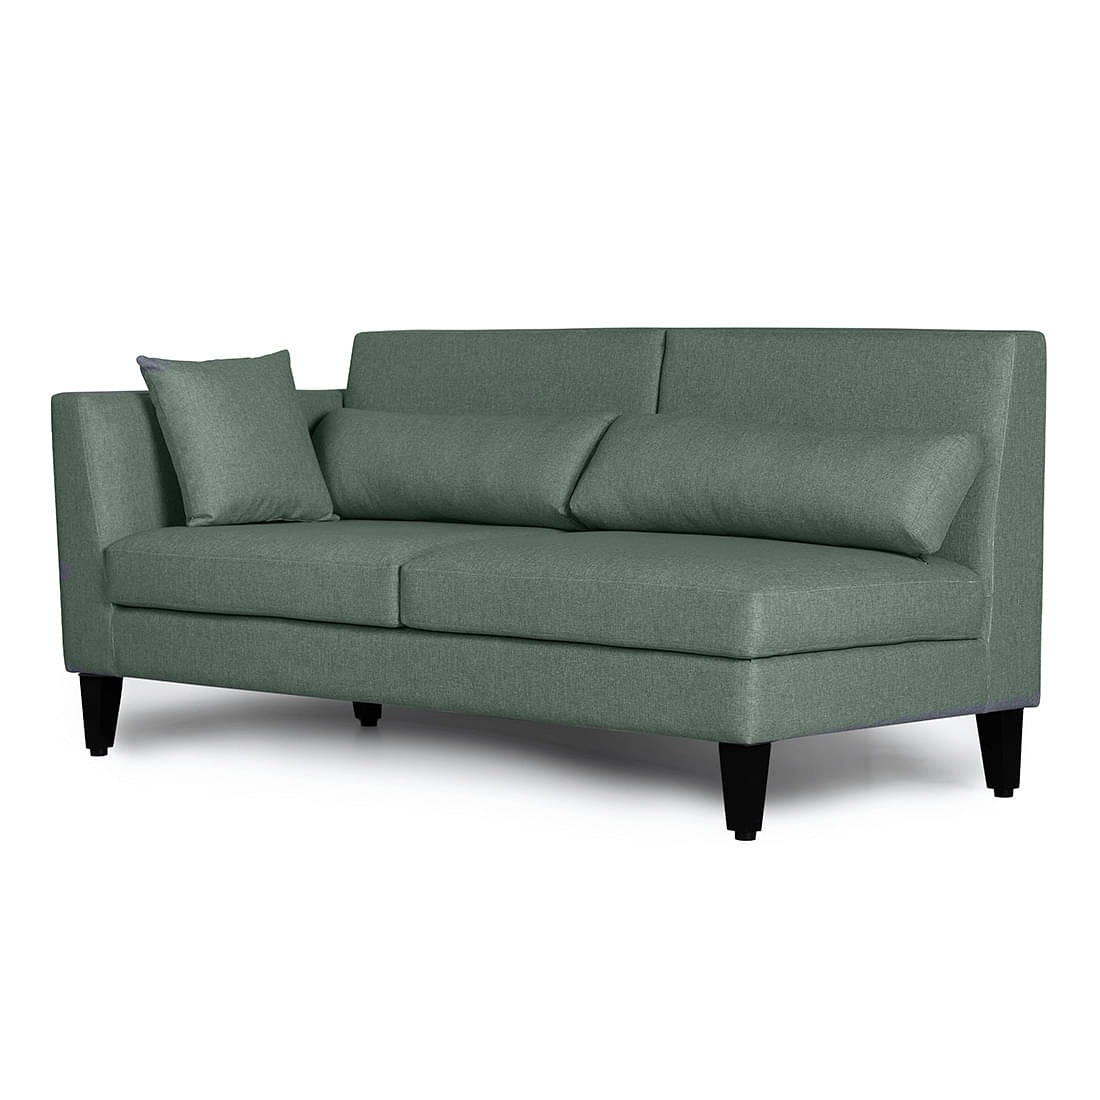 Werfo Lewis L Shape Sofa Set (3 Seater + Left Aligned Chaise) Omega Green